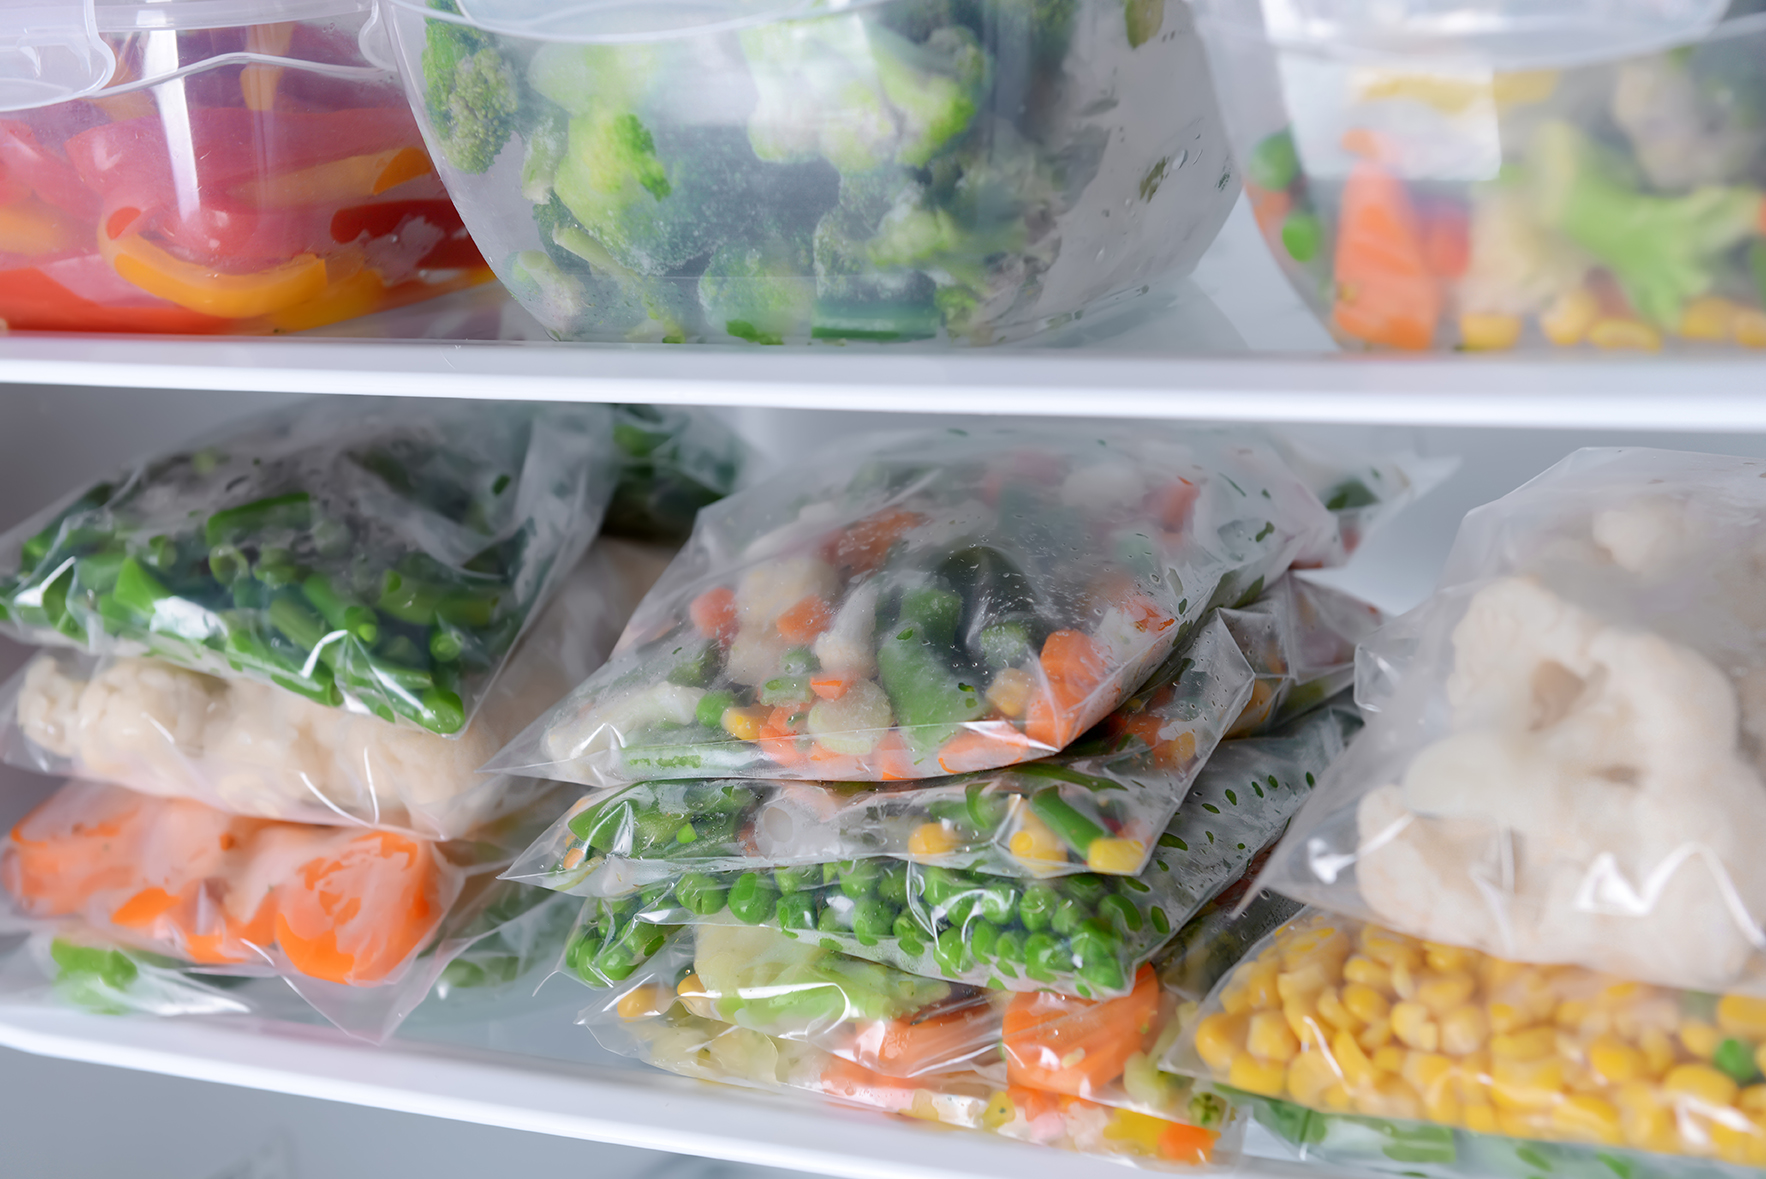 Plastic bags and containers with frozen vegetables in refrigerator